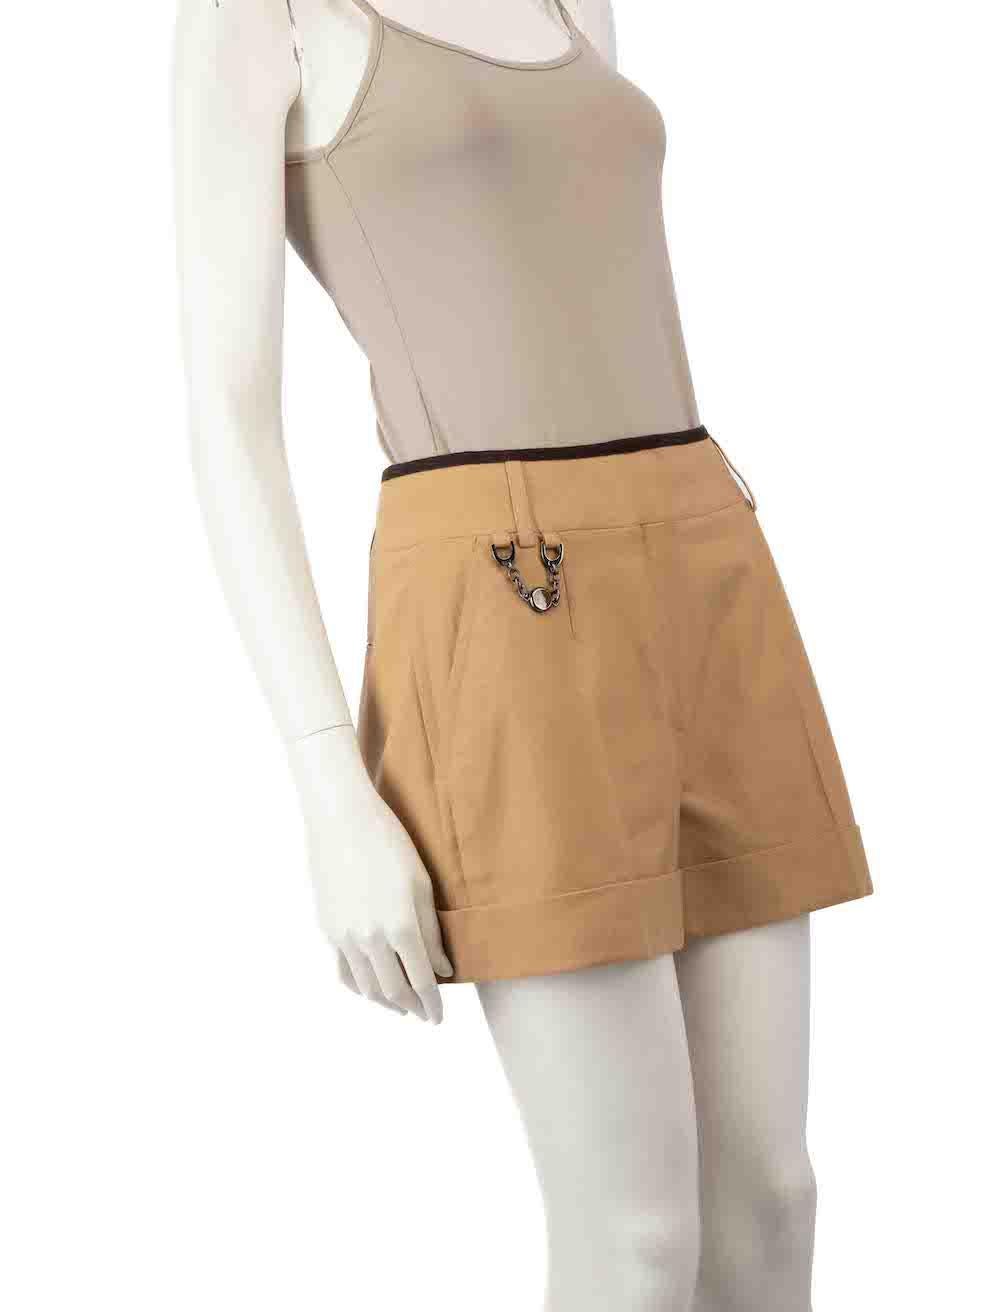 CONDITION is Very good. Hardly any visible wear to shorts is evident on this used Céline designer resale item.
 
 
 
 Details
 
 
 Camel
 
 Wool
 
 Shorts
 
 Logo chain detail
 
 2x Side pockets
 
 1x Back pocket
 
 Fly zip and hook fastening
 
 
 
